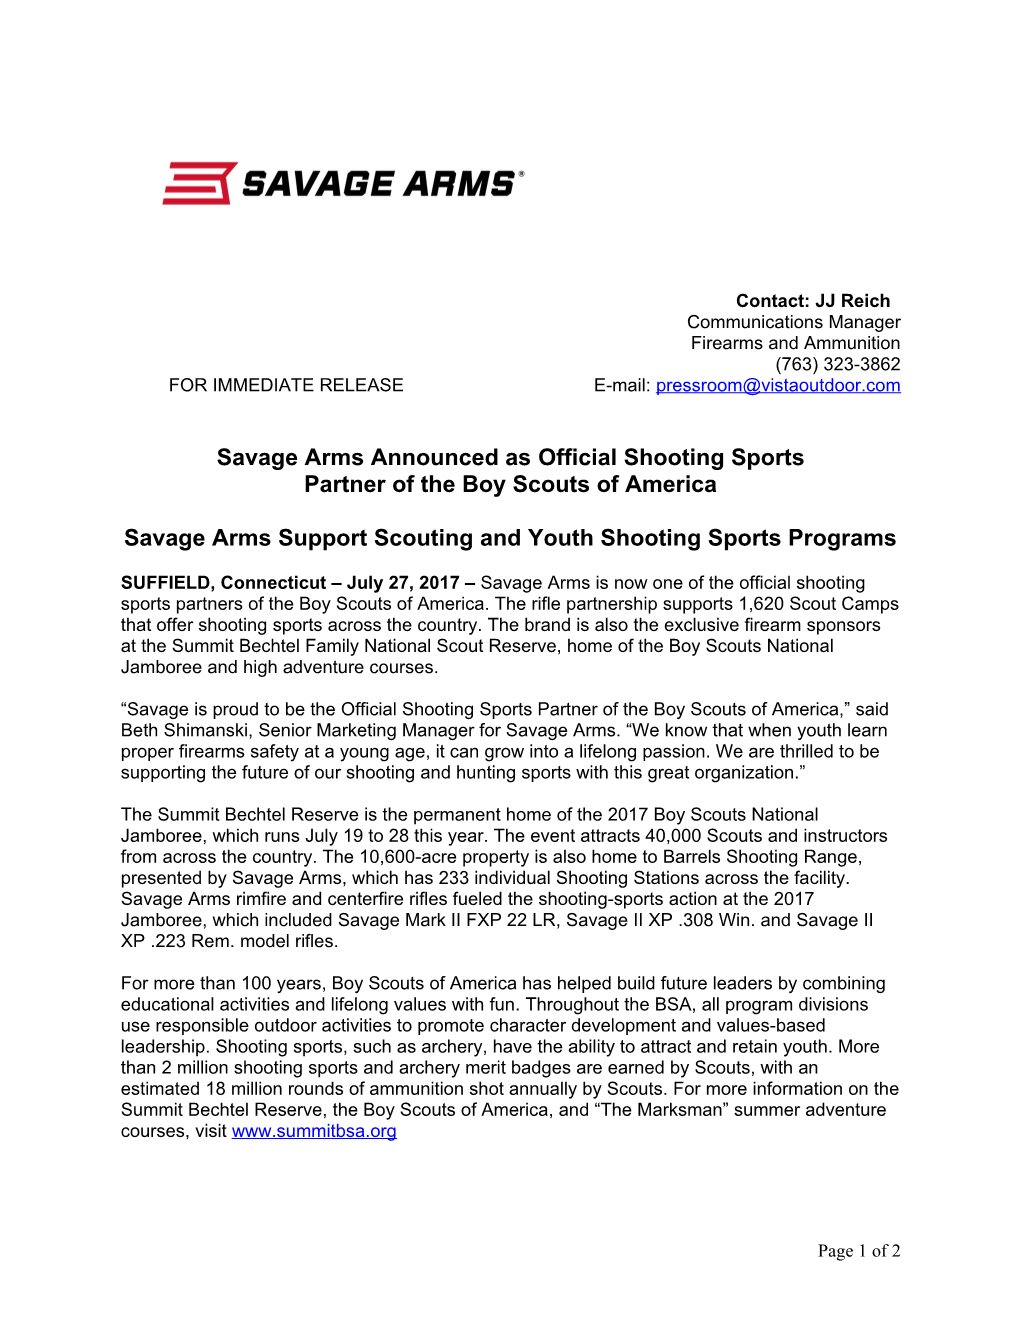 Savage Arms Support Scouting and Youth Shooting Sports Programs